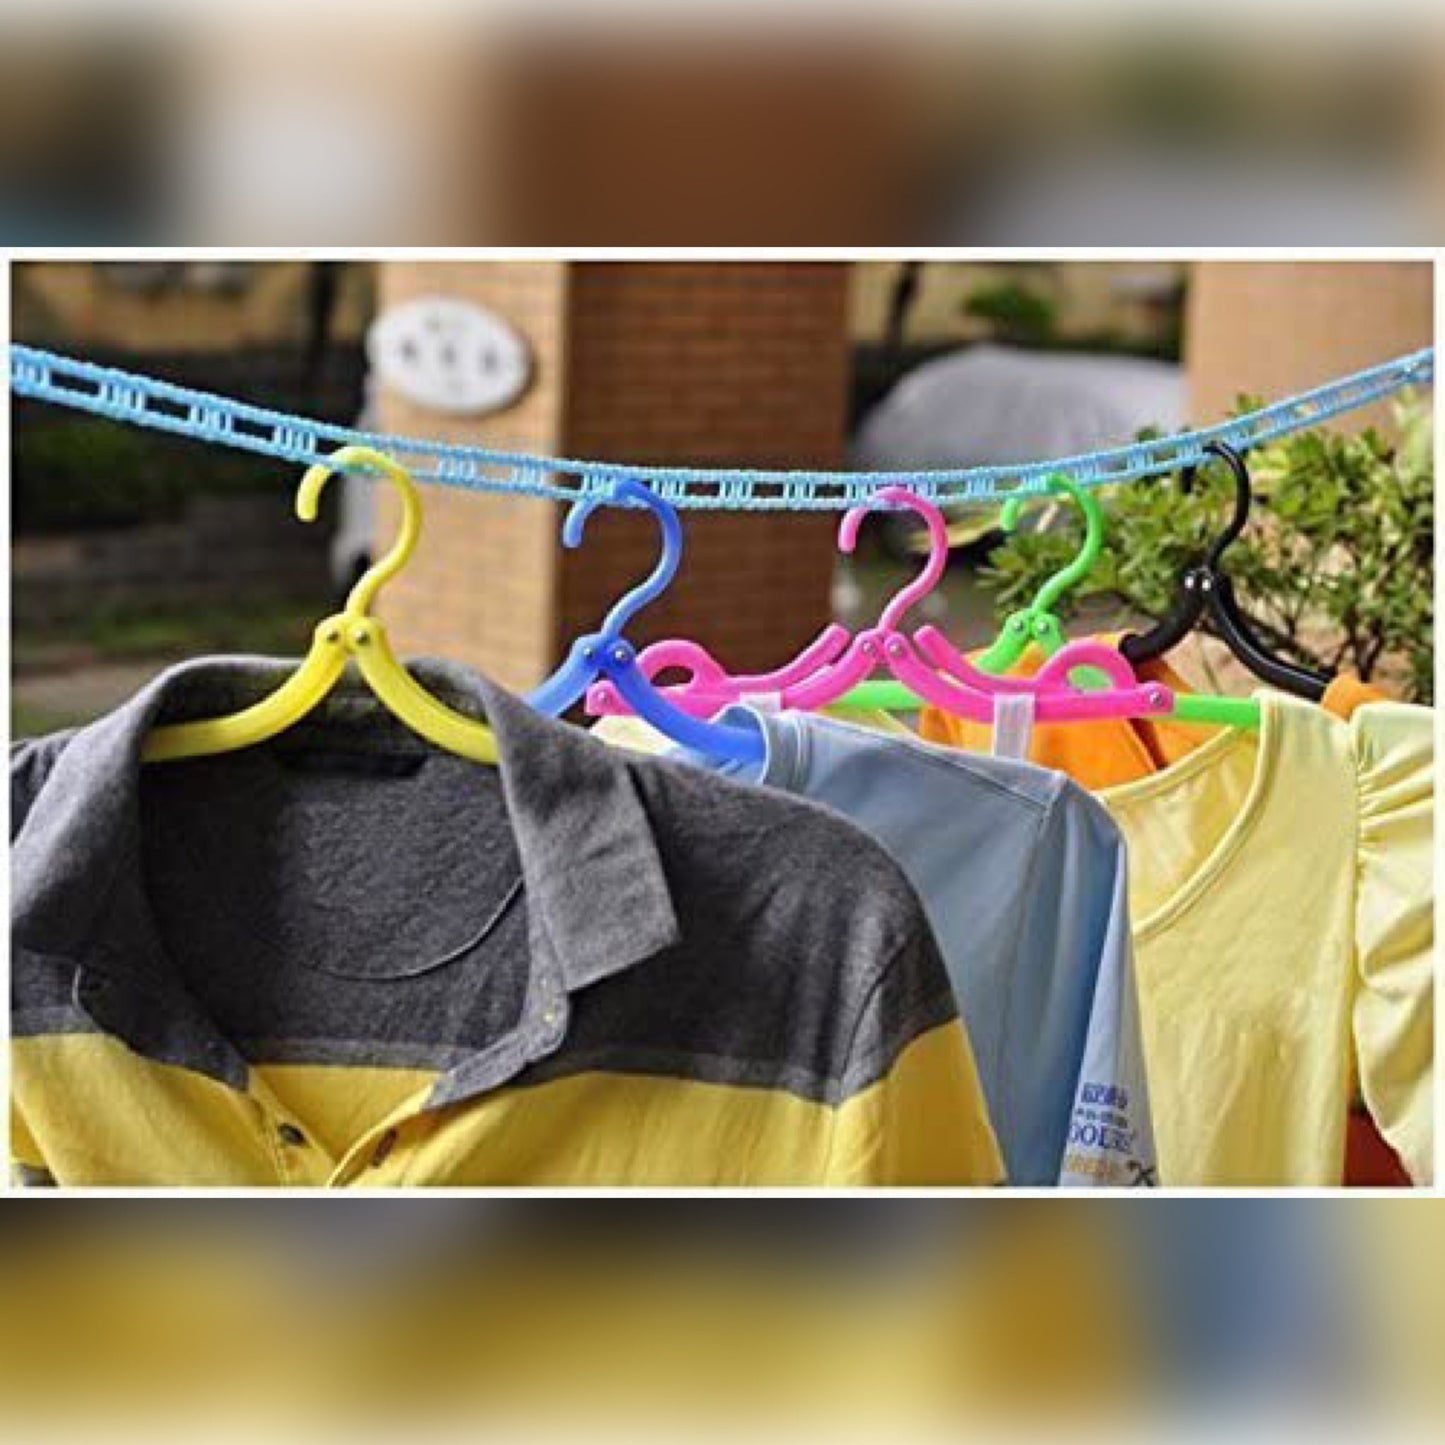 5 Meters Windproof Anti-Slip Clothes Washing Line